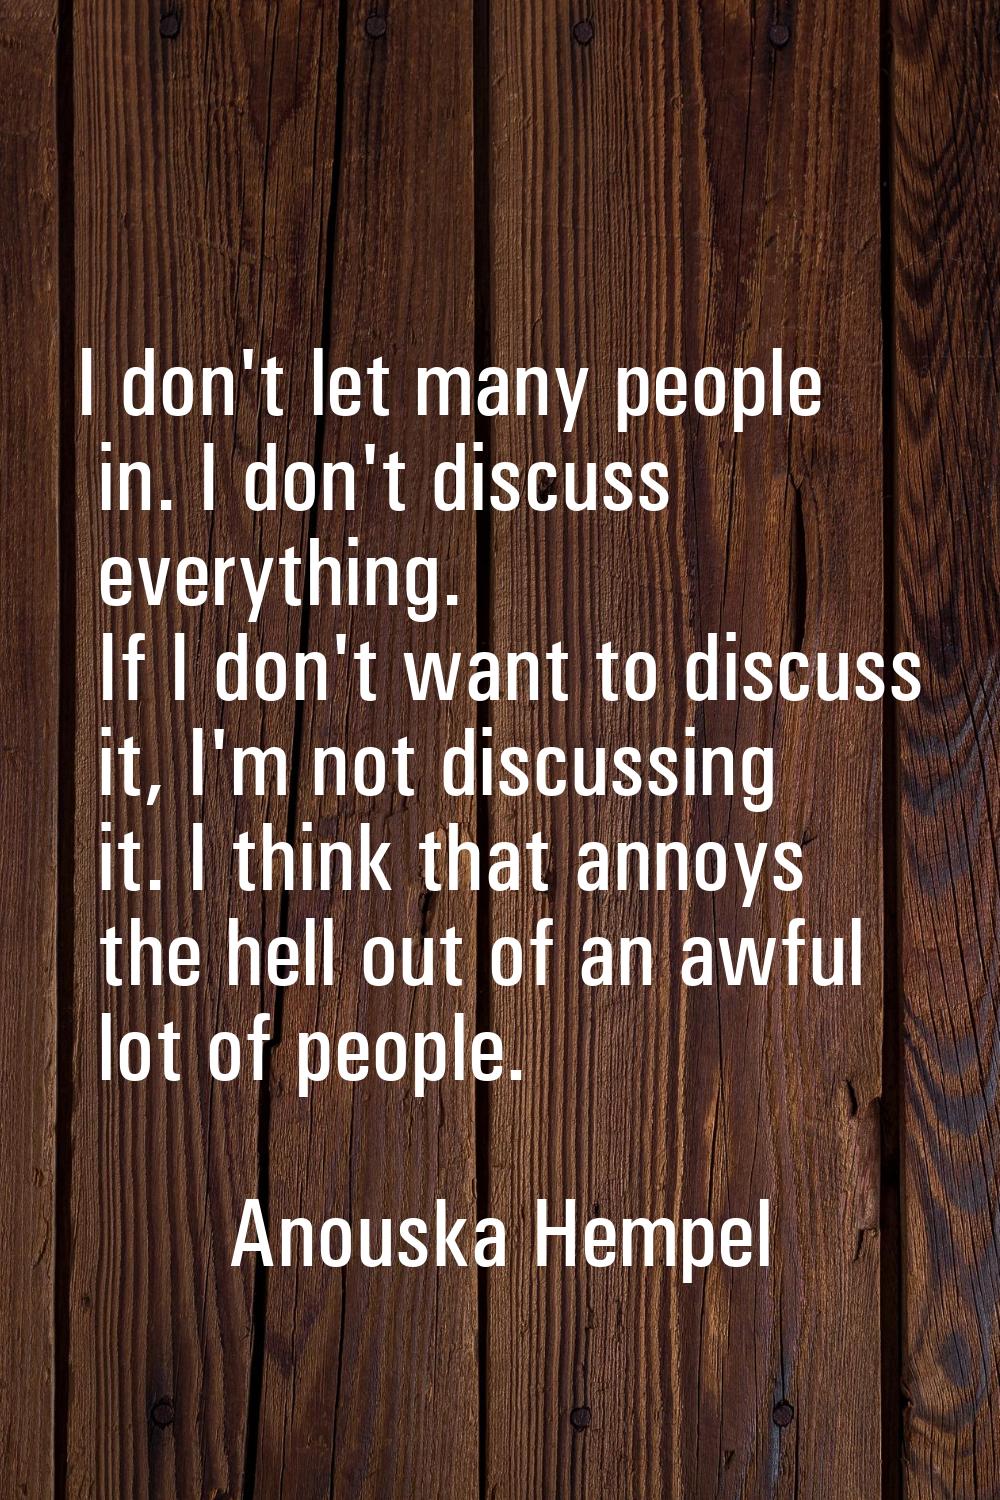 I don't let many people in. I don't discuss everything. If I don't want to discuss it, I'm not disc